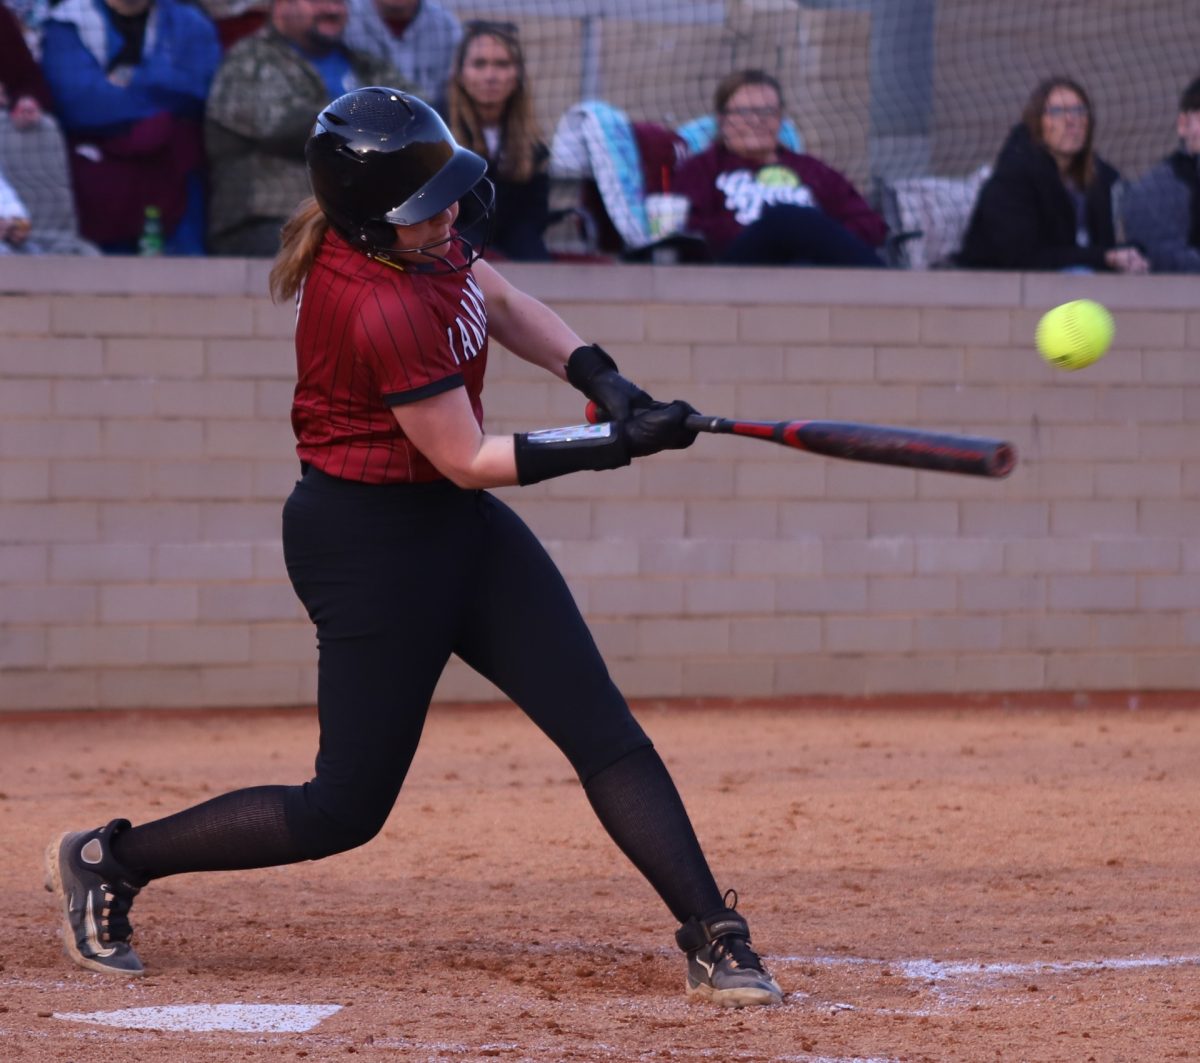 Harlan County first baseman Halanah Shepherd had one of the Lady Bears two hits in a 14-1 loss to visiting Jackson County on Saturday.